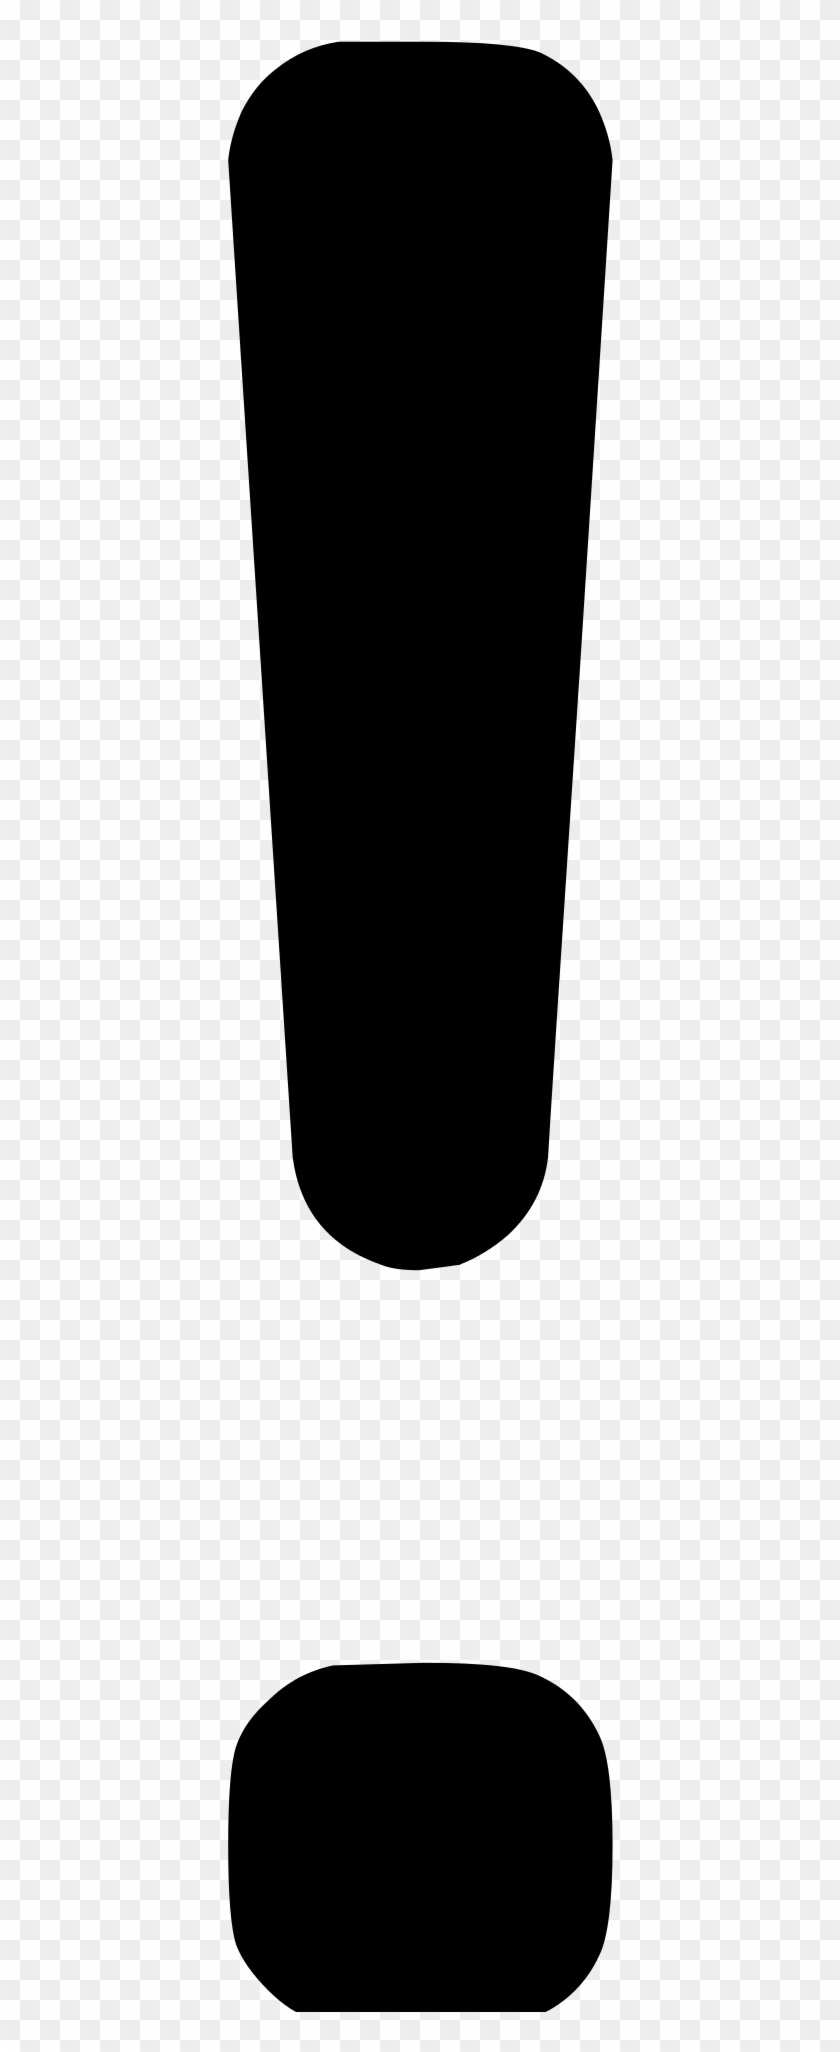 Exclamation Mark Png - Black Transparent Background Exclamation Point Clipart@pikpng.com